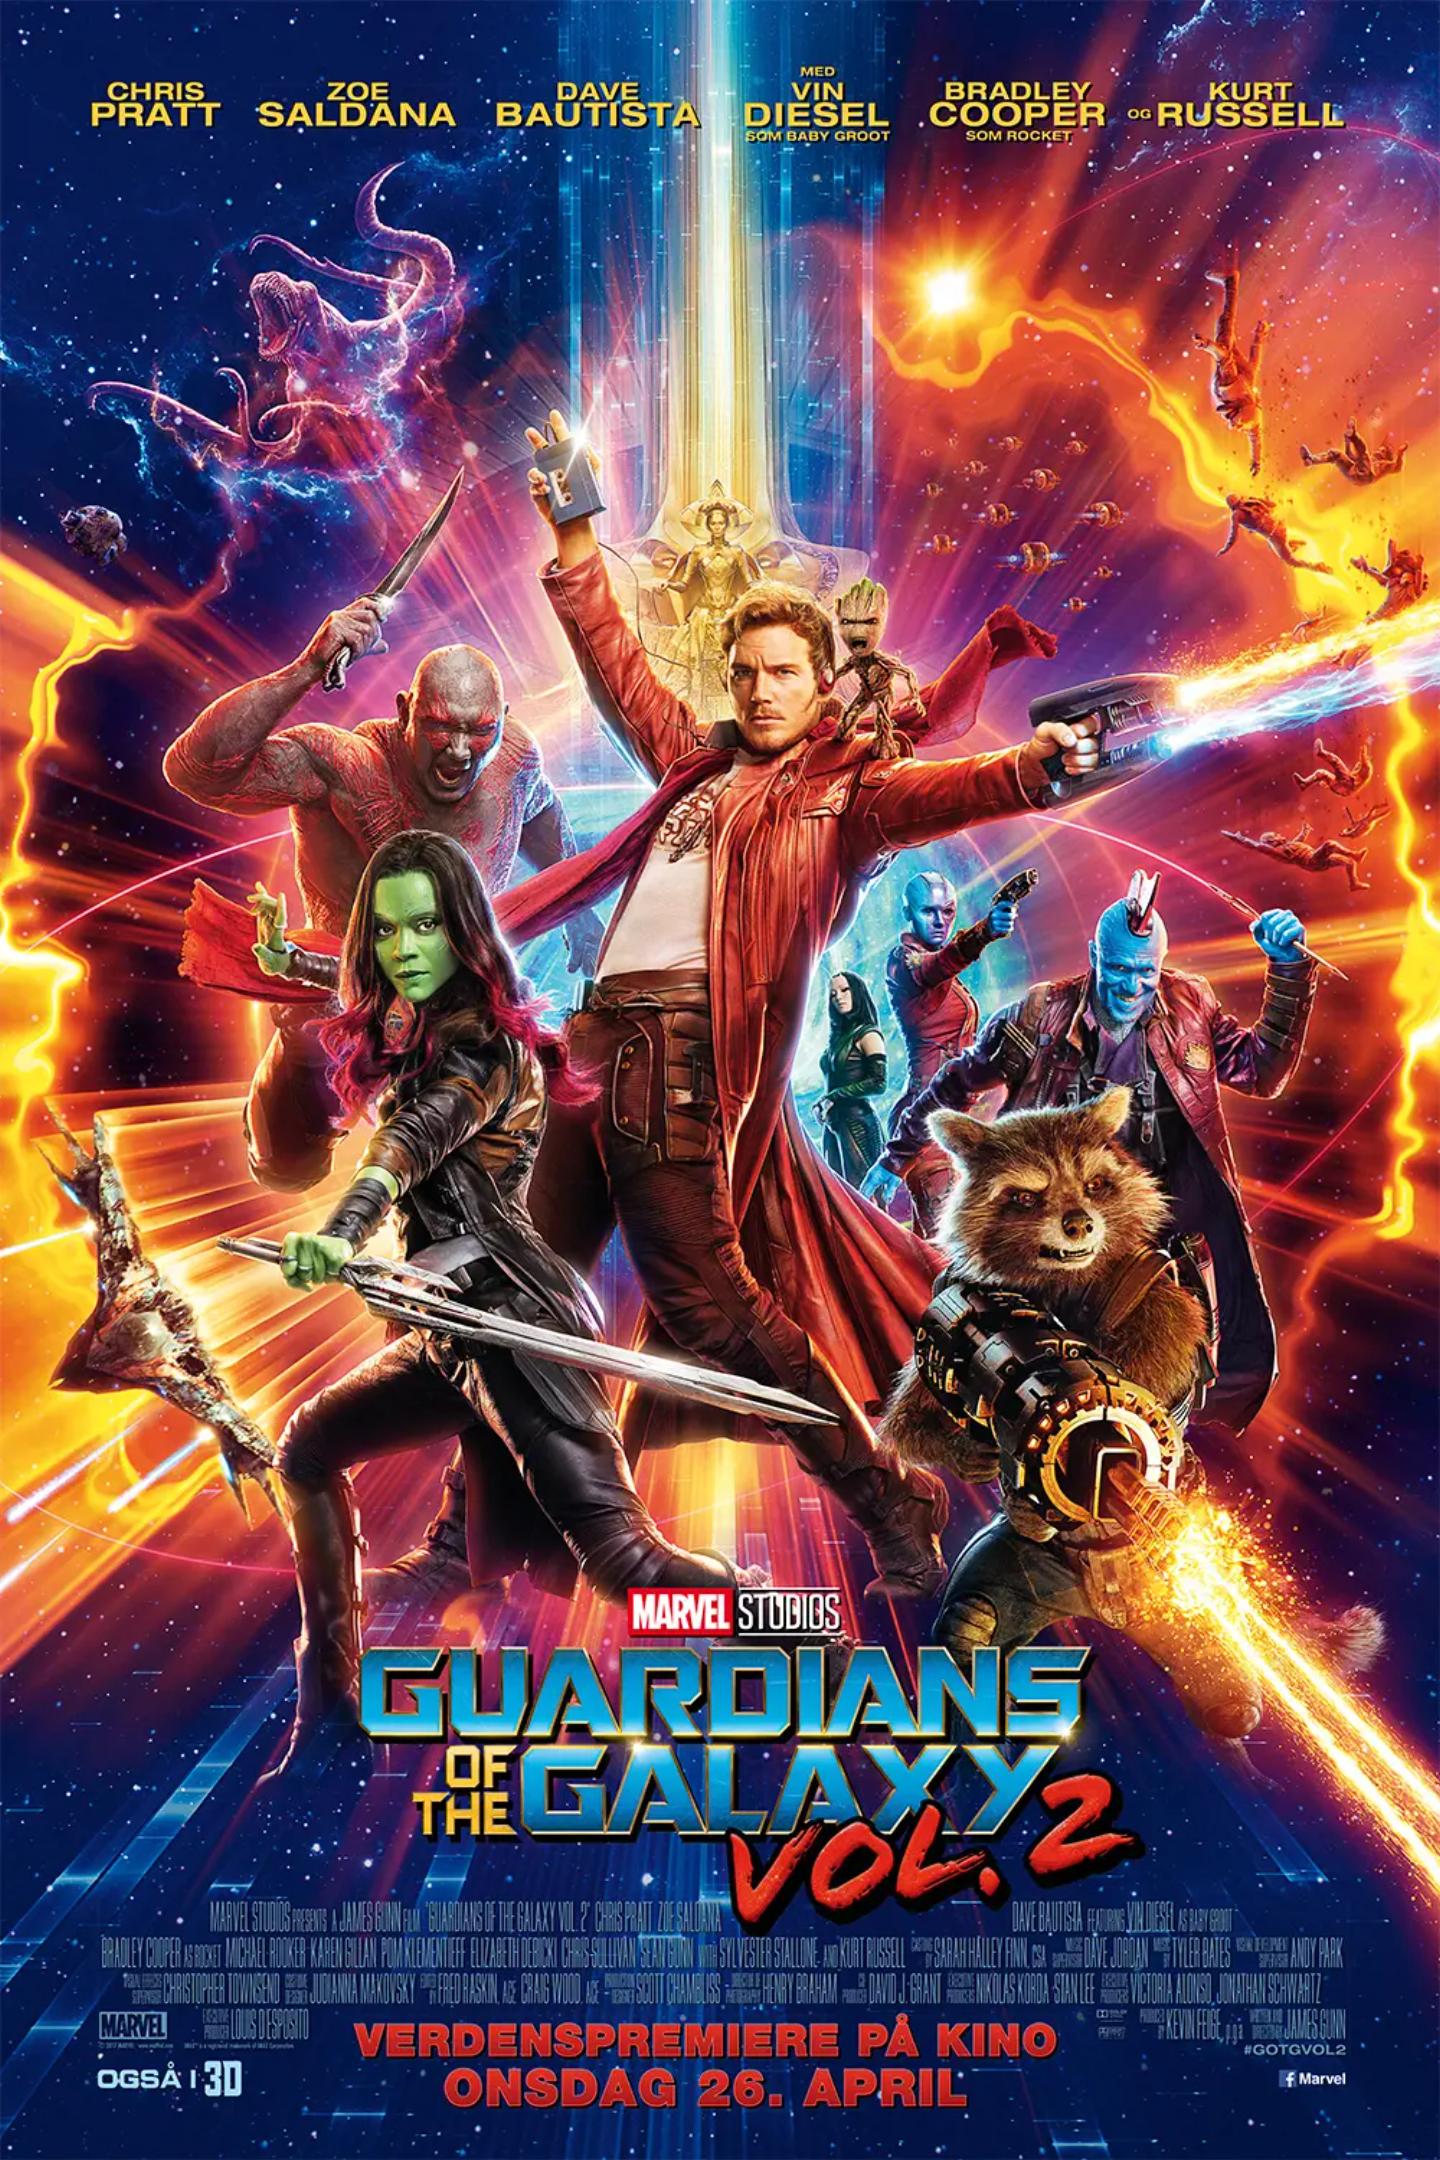 Plakat for 'Guardians of the Galaxy Vol. 2 (3D ATMOS)'